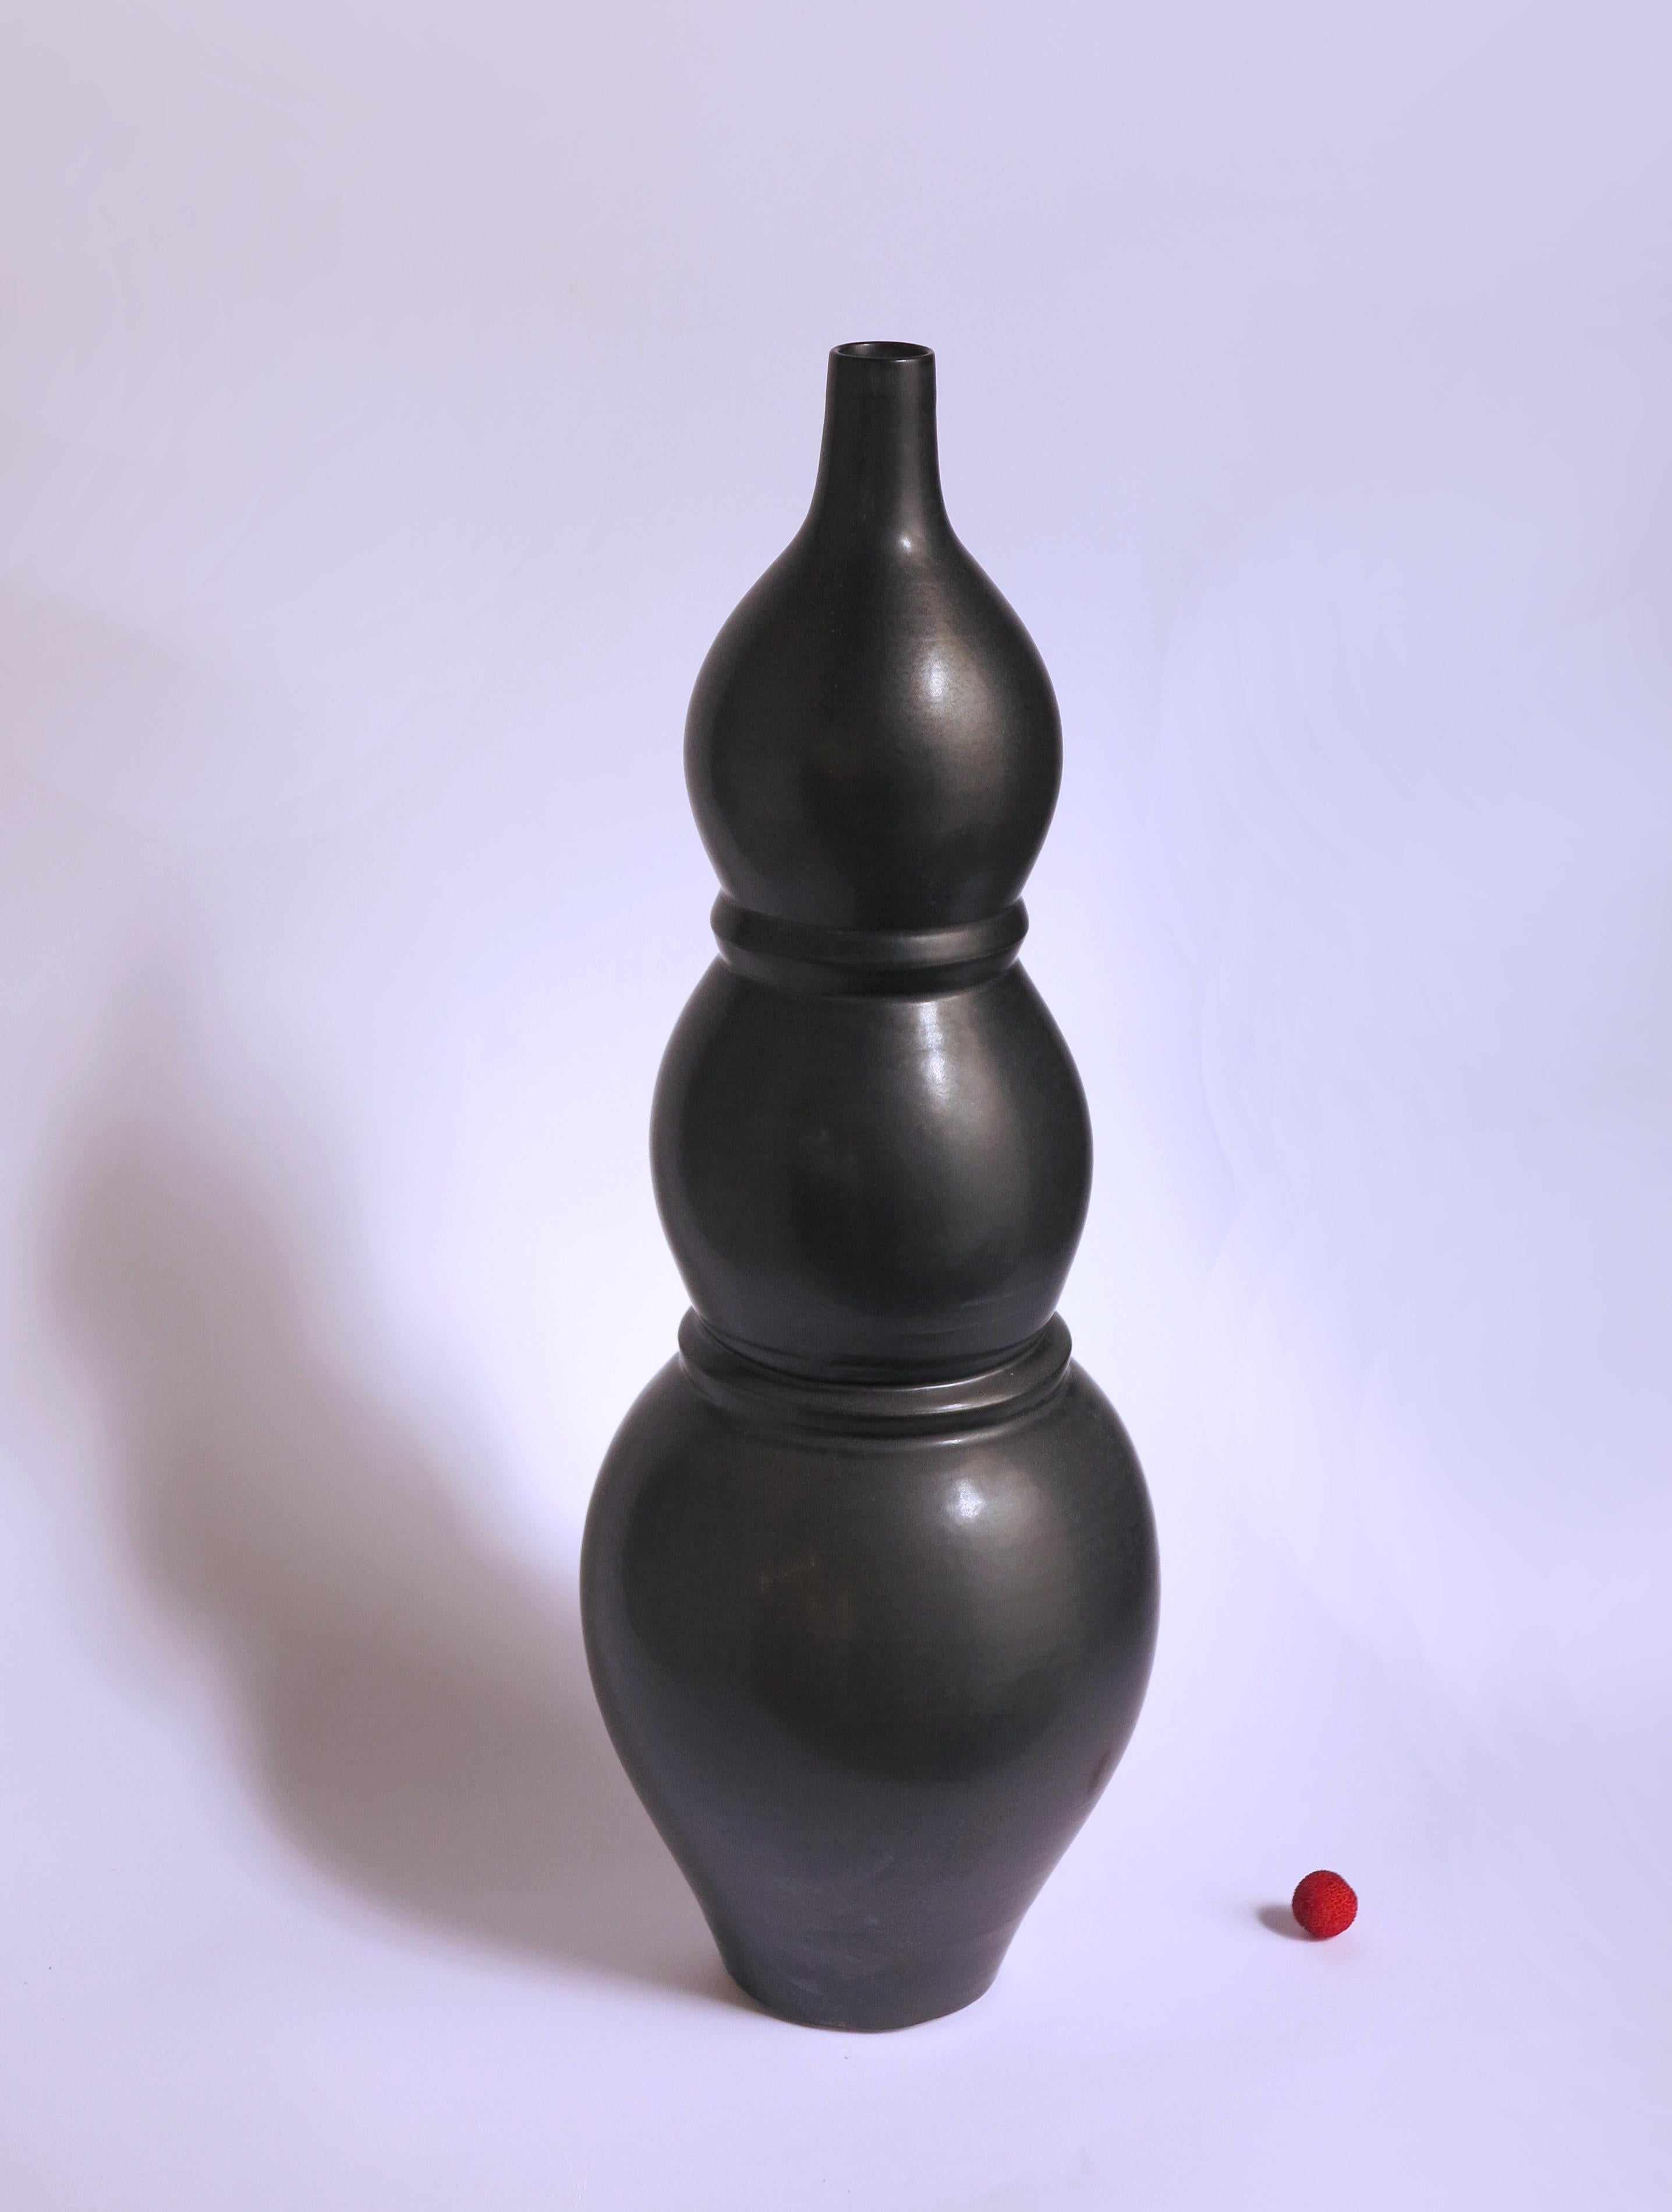 Grand vase Noir by Cica Gomez
Dimensions: Ø 16cm x H 48cm
Materials: Stoneware


Usual objects. My work is first driven by the search for the line. The one that it draw when the object takes shape and place in space. That which delimits a